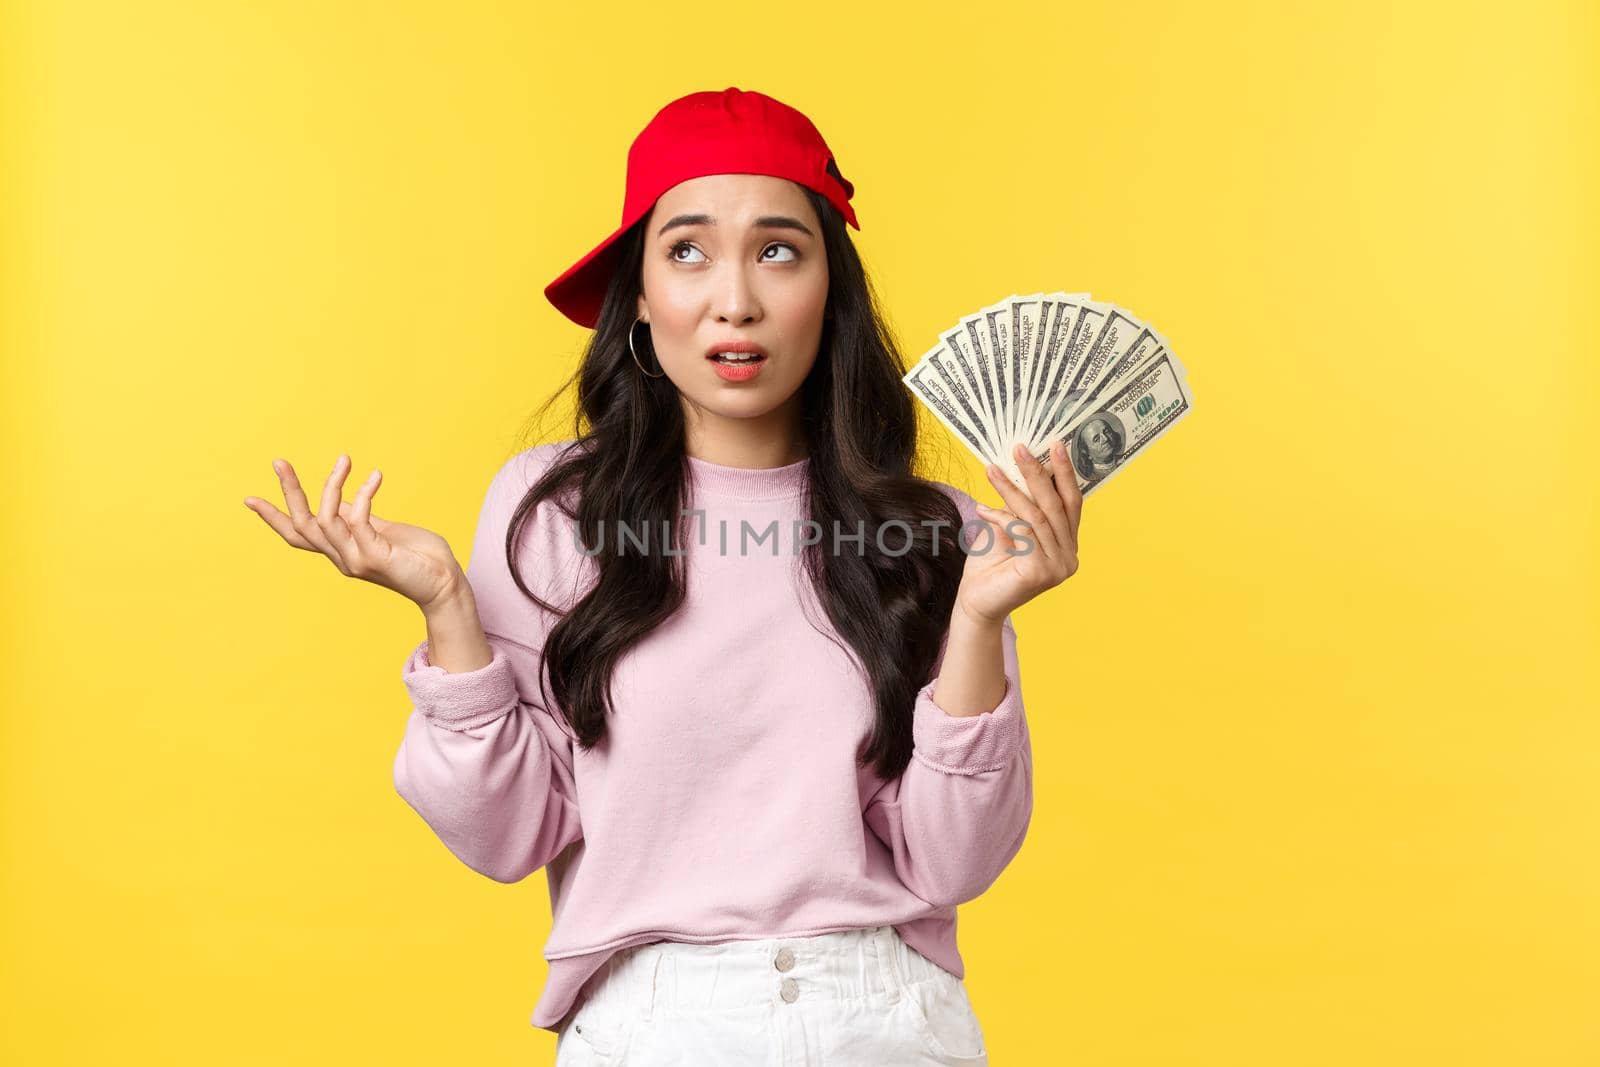 People emotions, lifestyle leisure and beauty concept. Unbothered cool and stylish rich girl in red cap, bragging about her wealth, showing money, careless spend cash, yellow background.